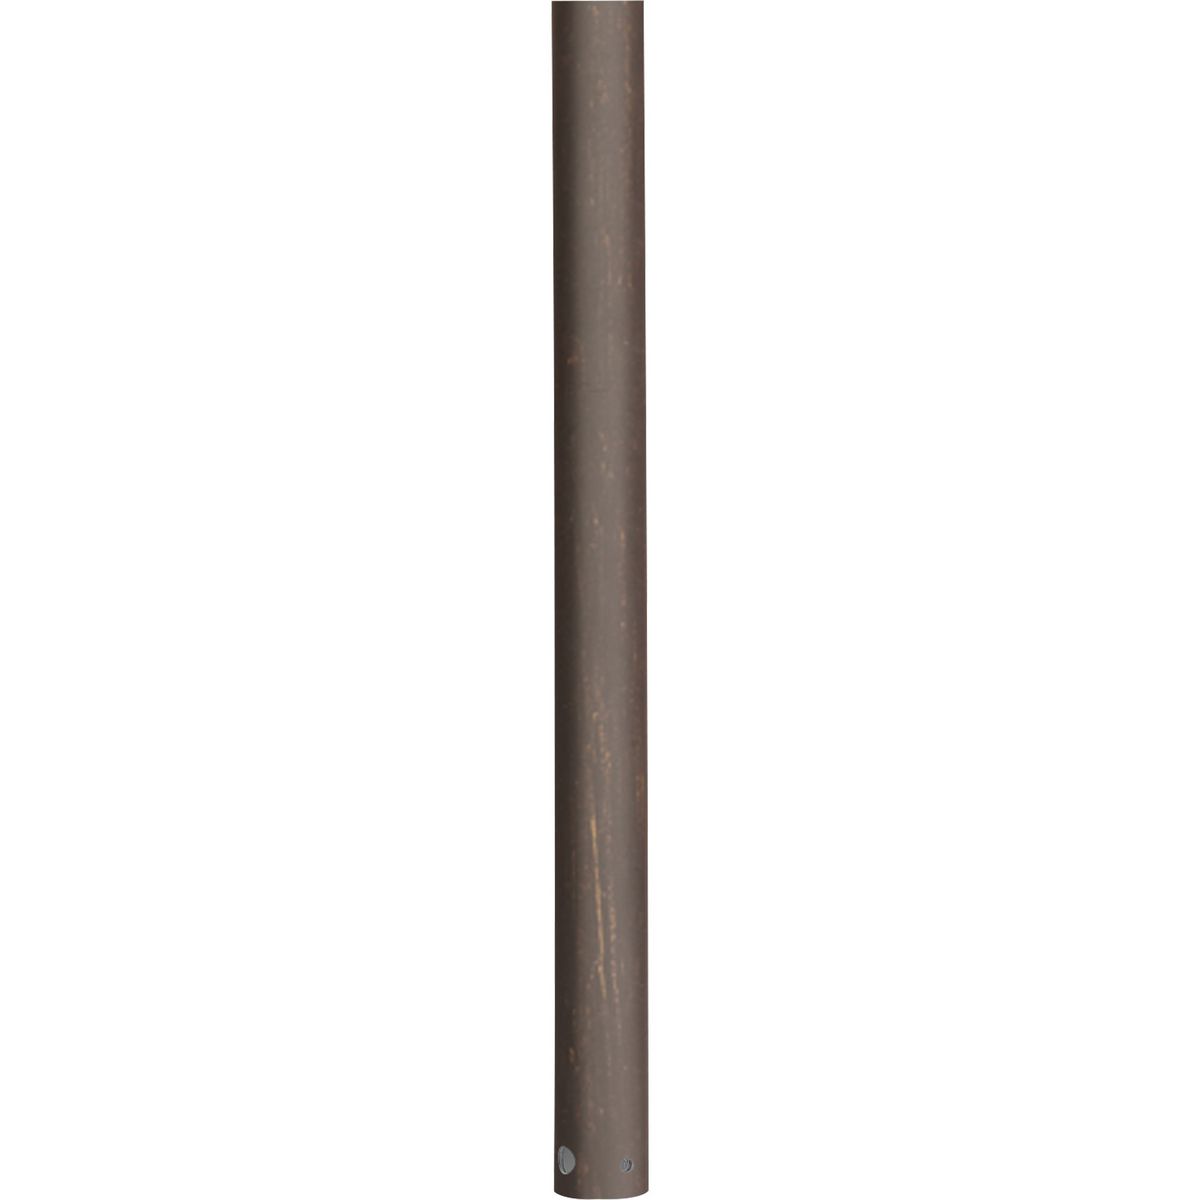 AirPro Collection 24 In. Ceiling Fan Downrod in Antique Bronze